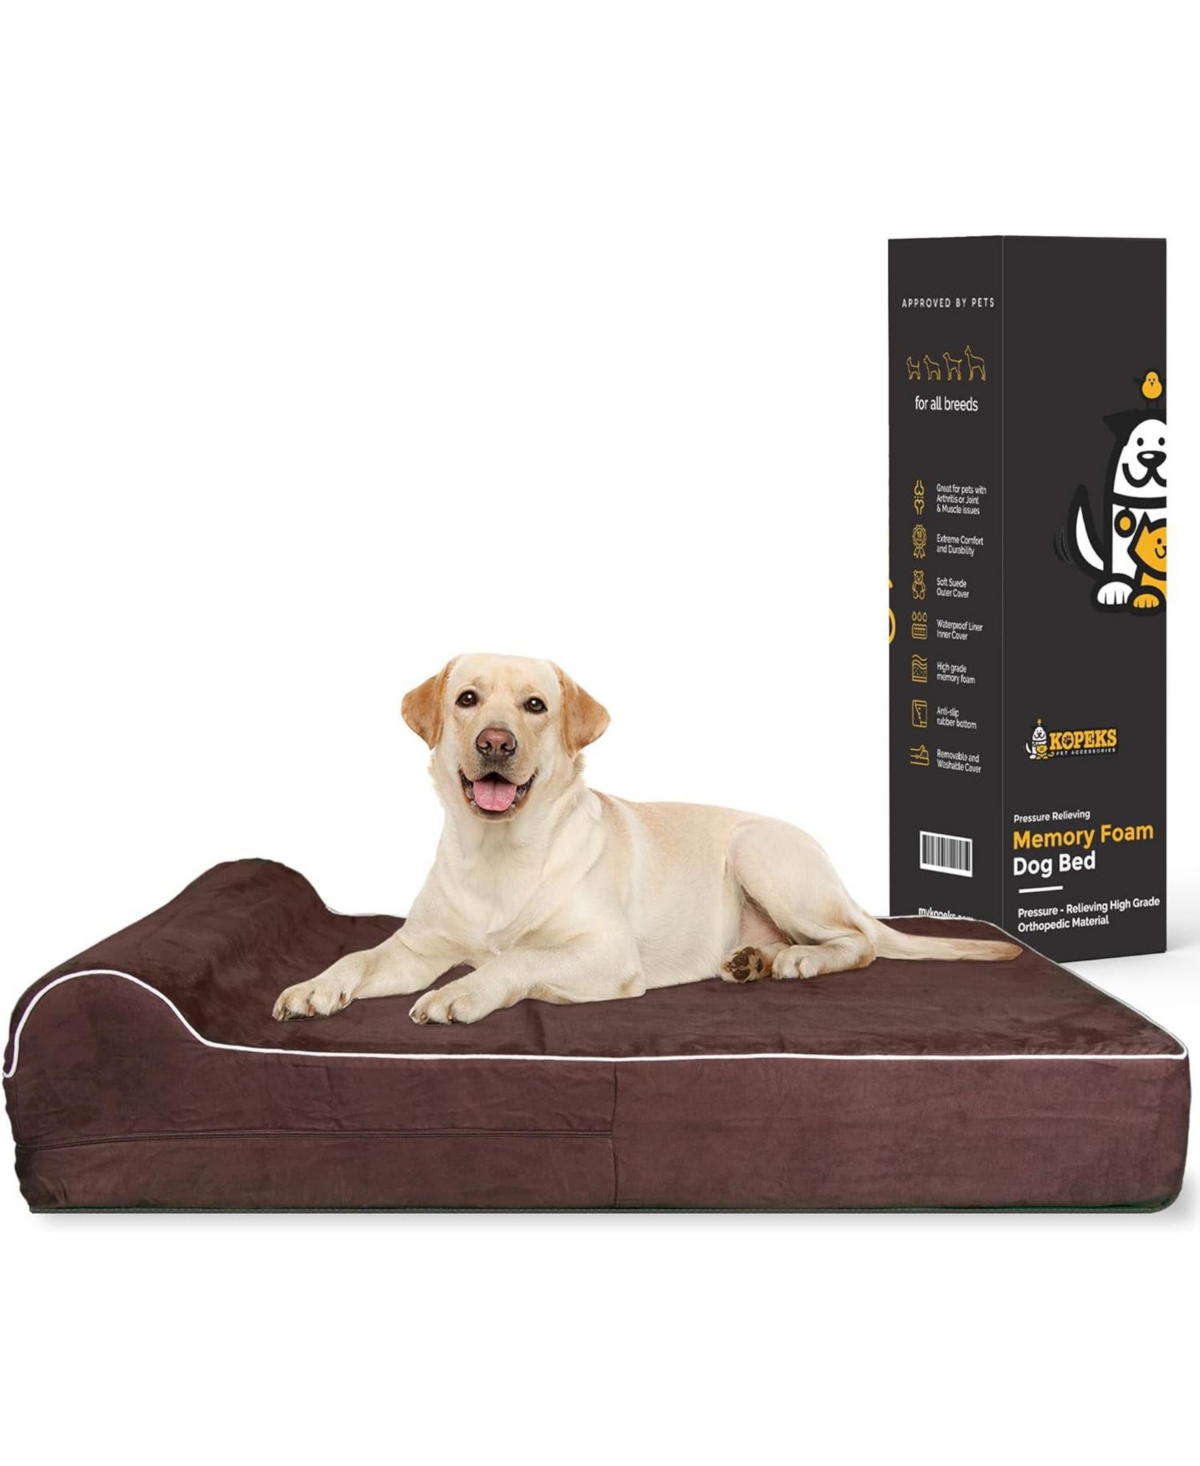 Orthopedic Dog Bed Memory Foam With Pillow XLarge - Brown